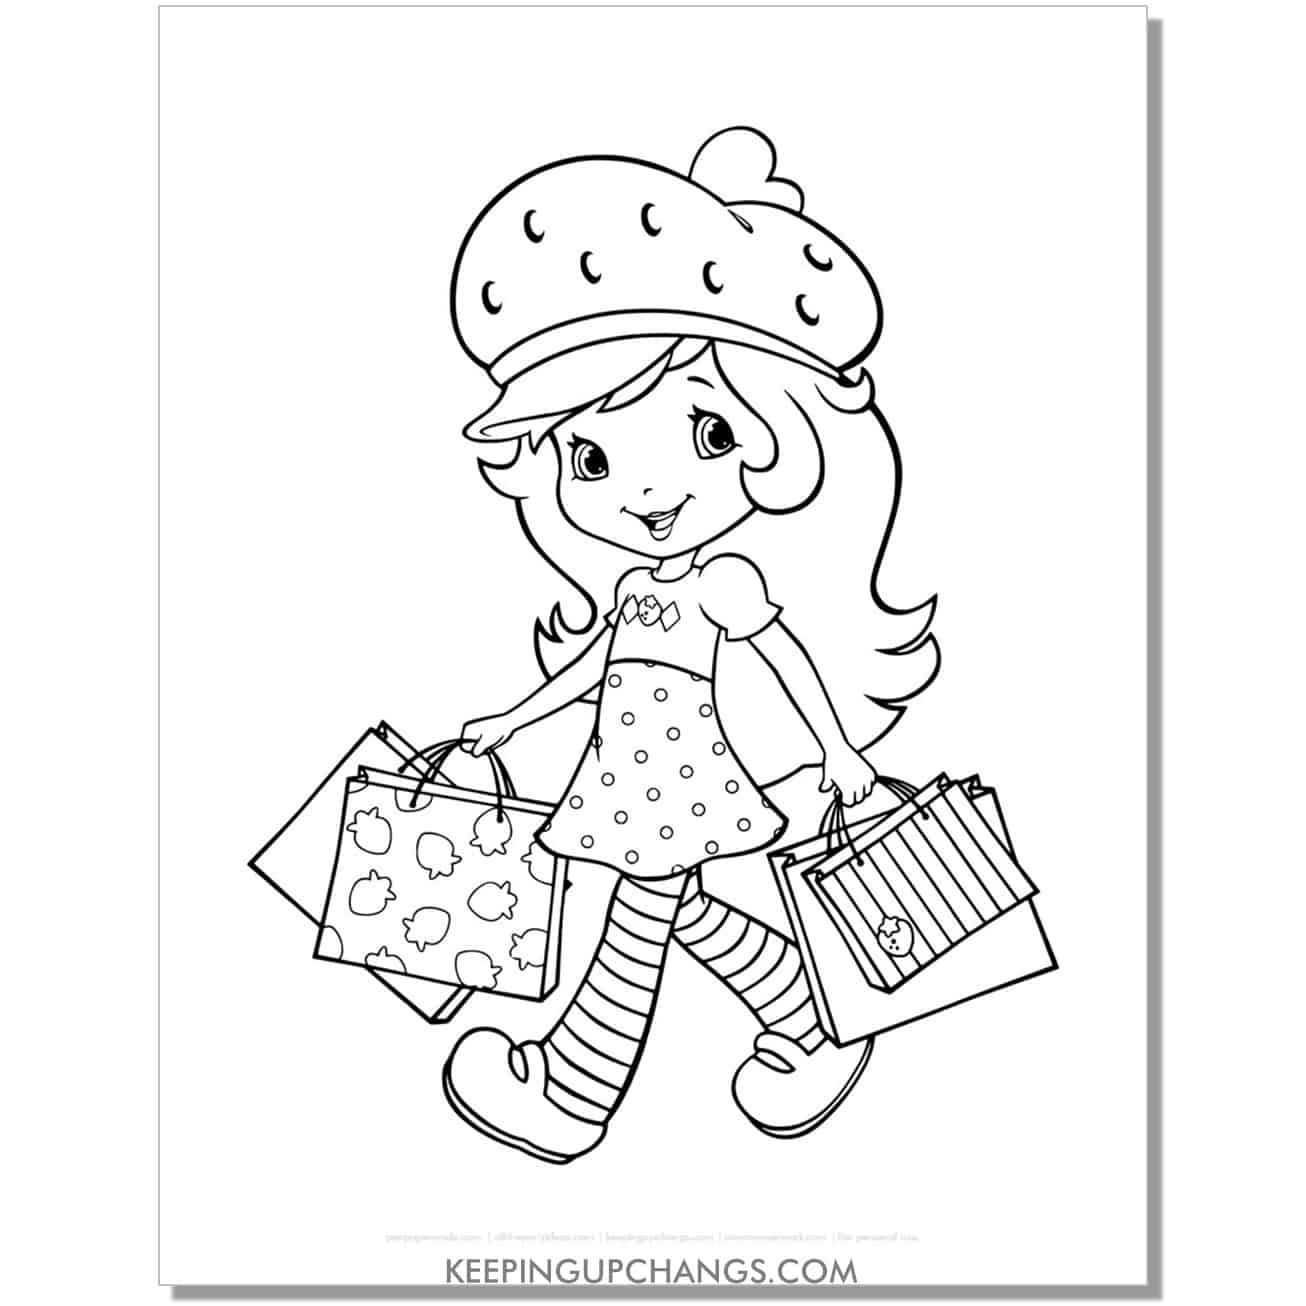 free strawberry shortcake going shopping coloring page, sheet.